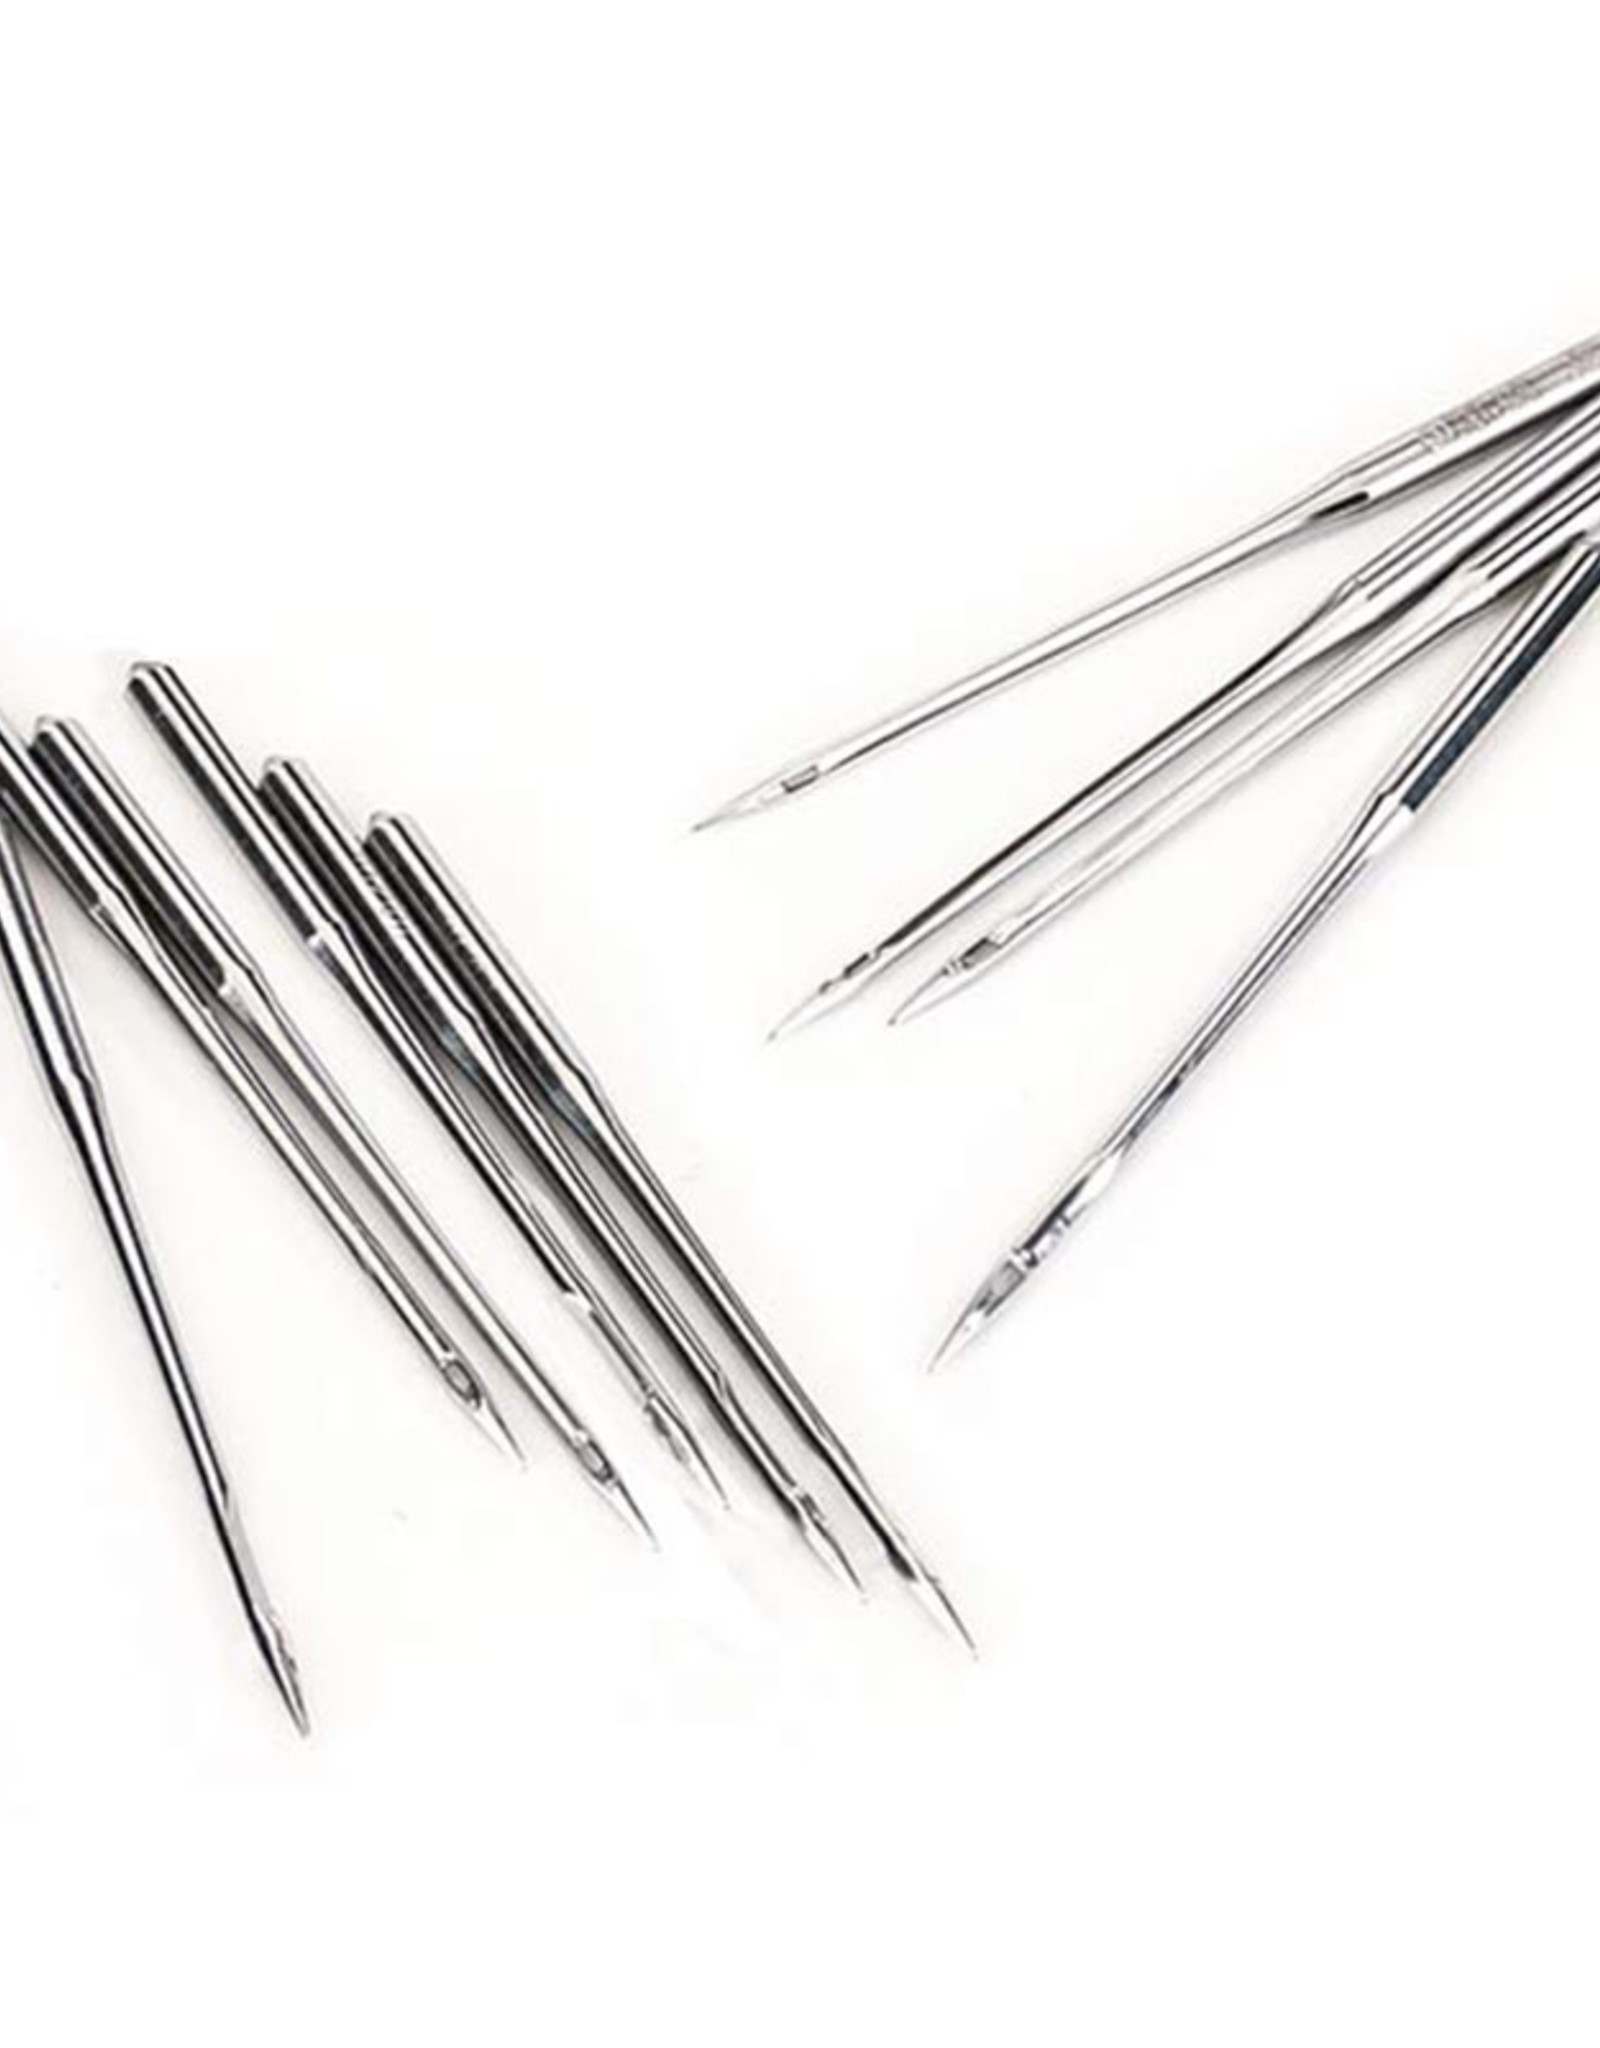 Q'Nique Long Arm Needles size 14, 16 and/or 18